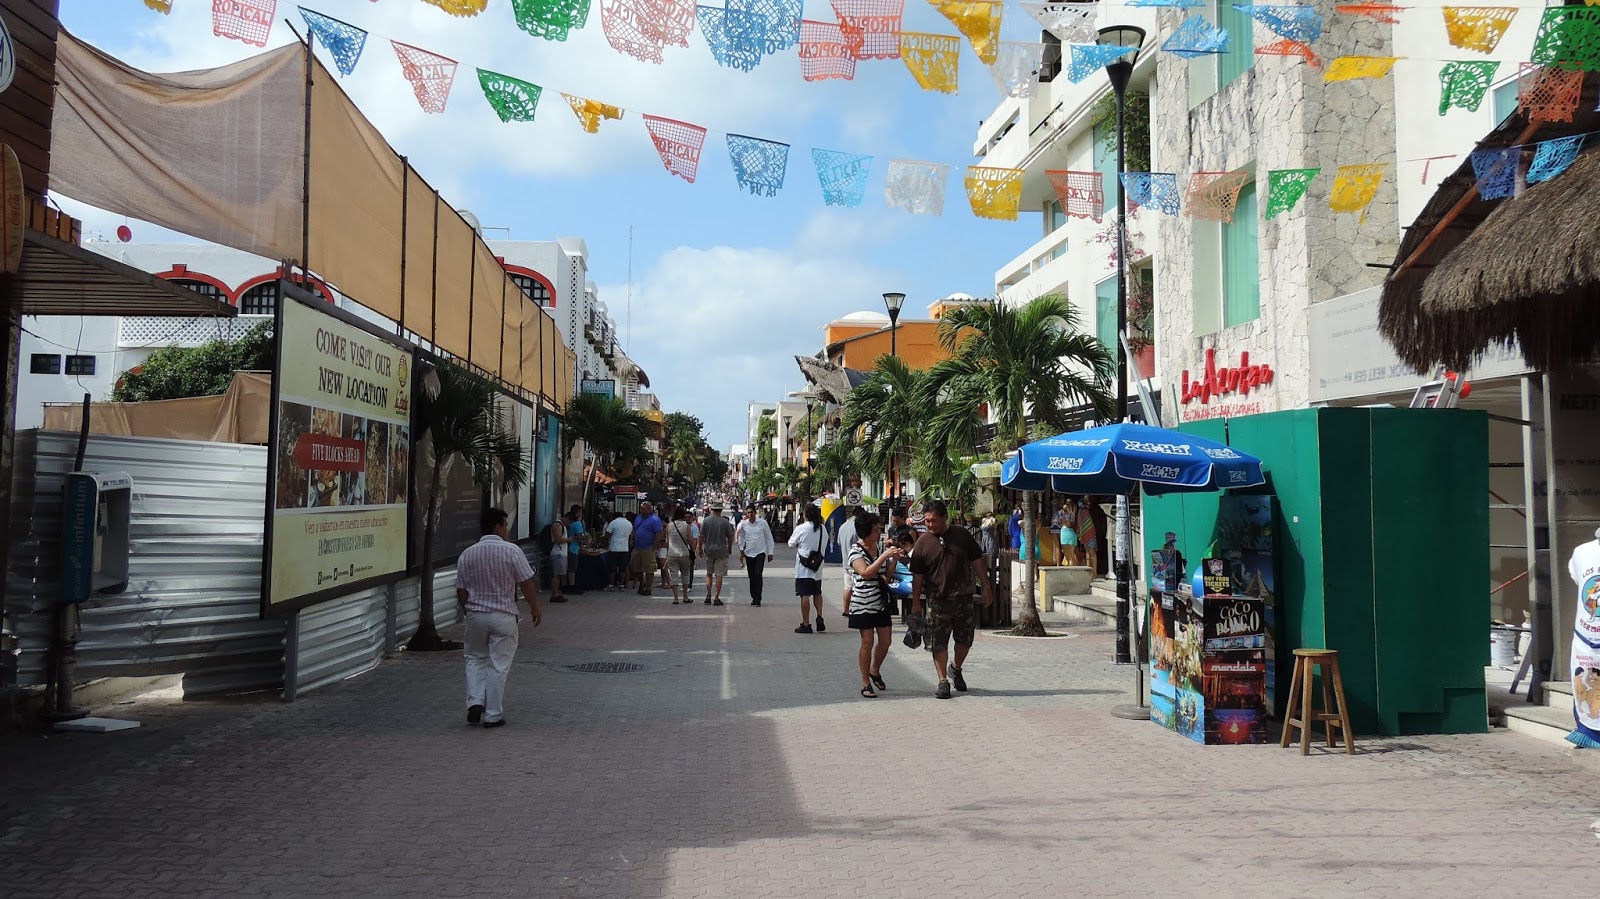 Travel with Kevin and Ruth: Day trip to the island of Cozumel